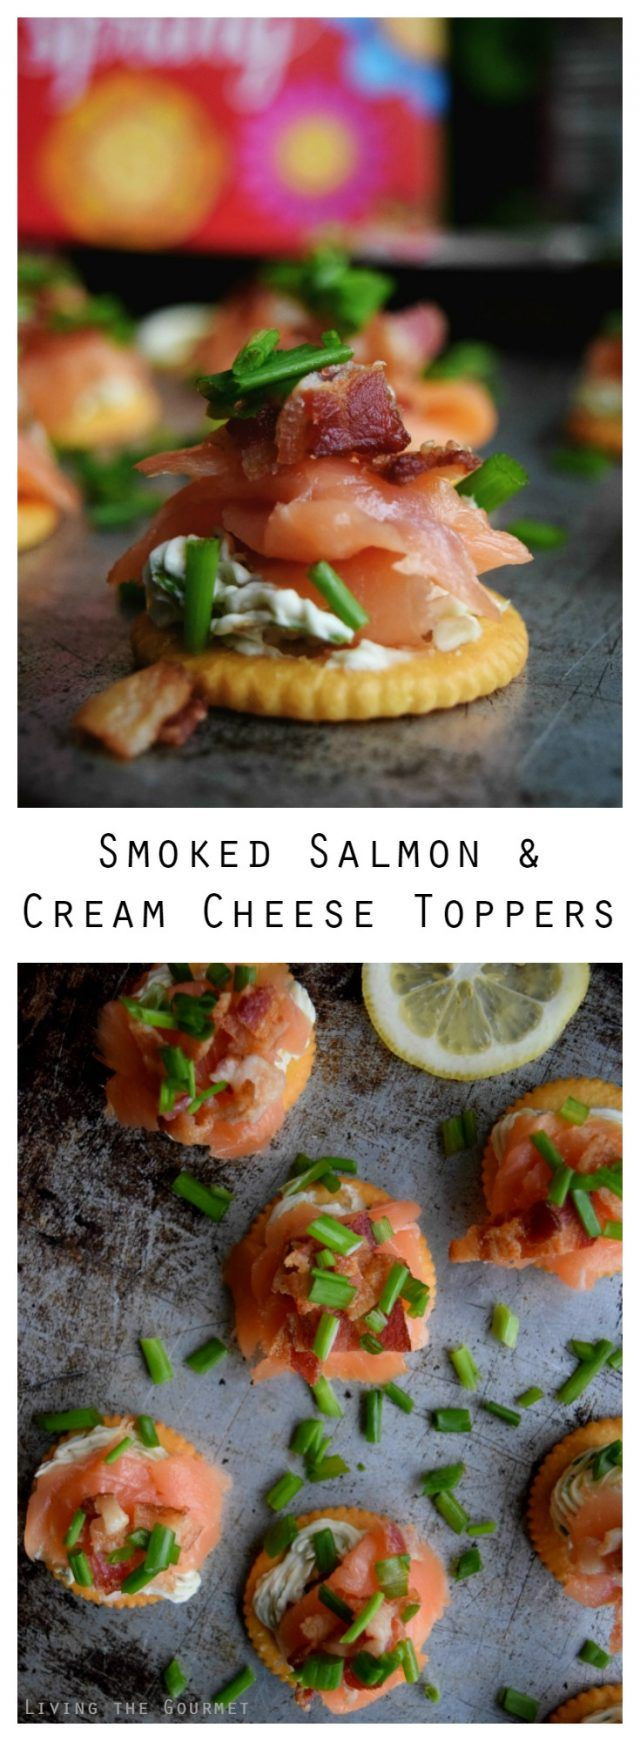 Smoked Salmon And Crackers Appetizer
 Smoked Salmon & Cream Cheese Toppers Recipe